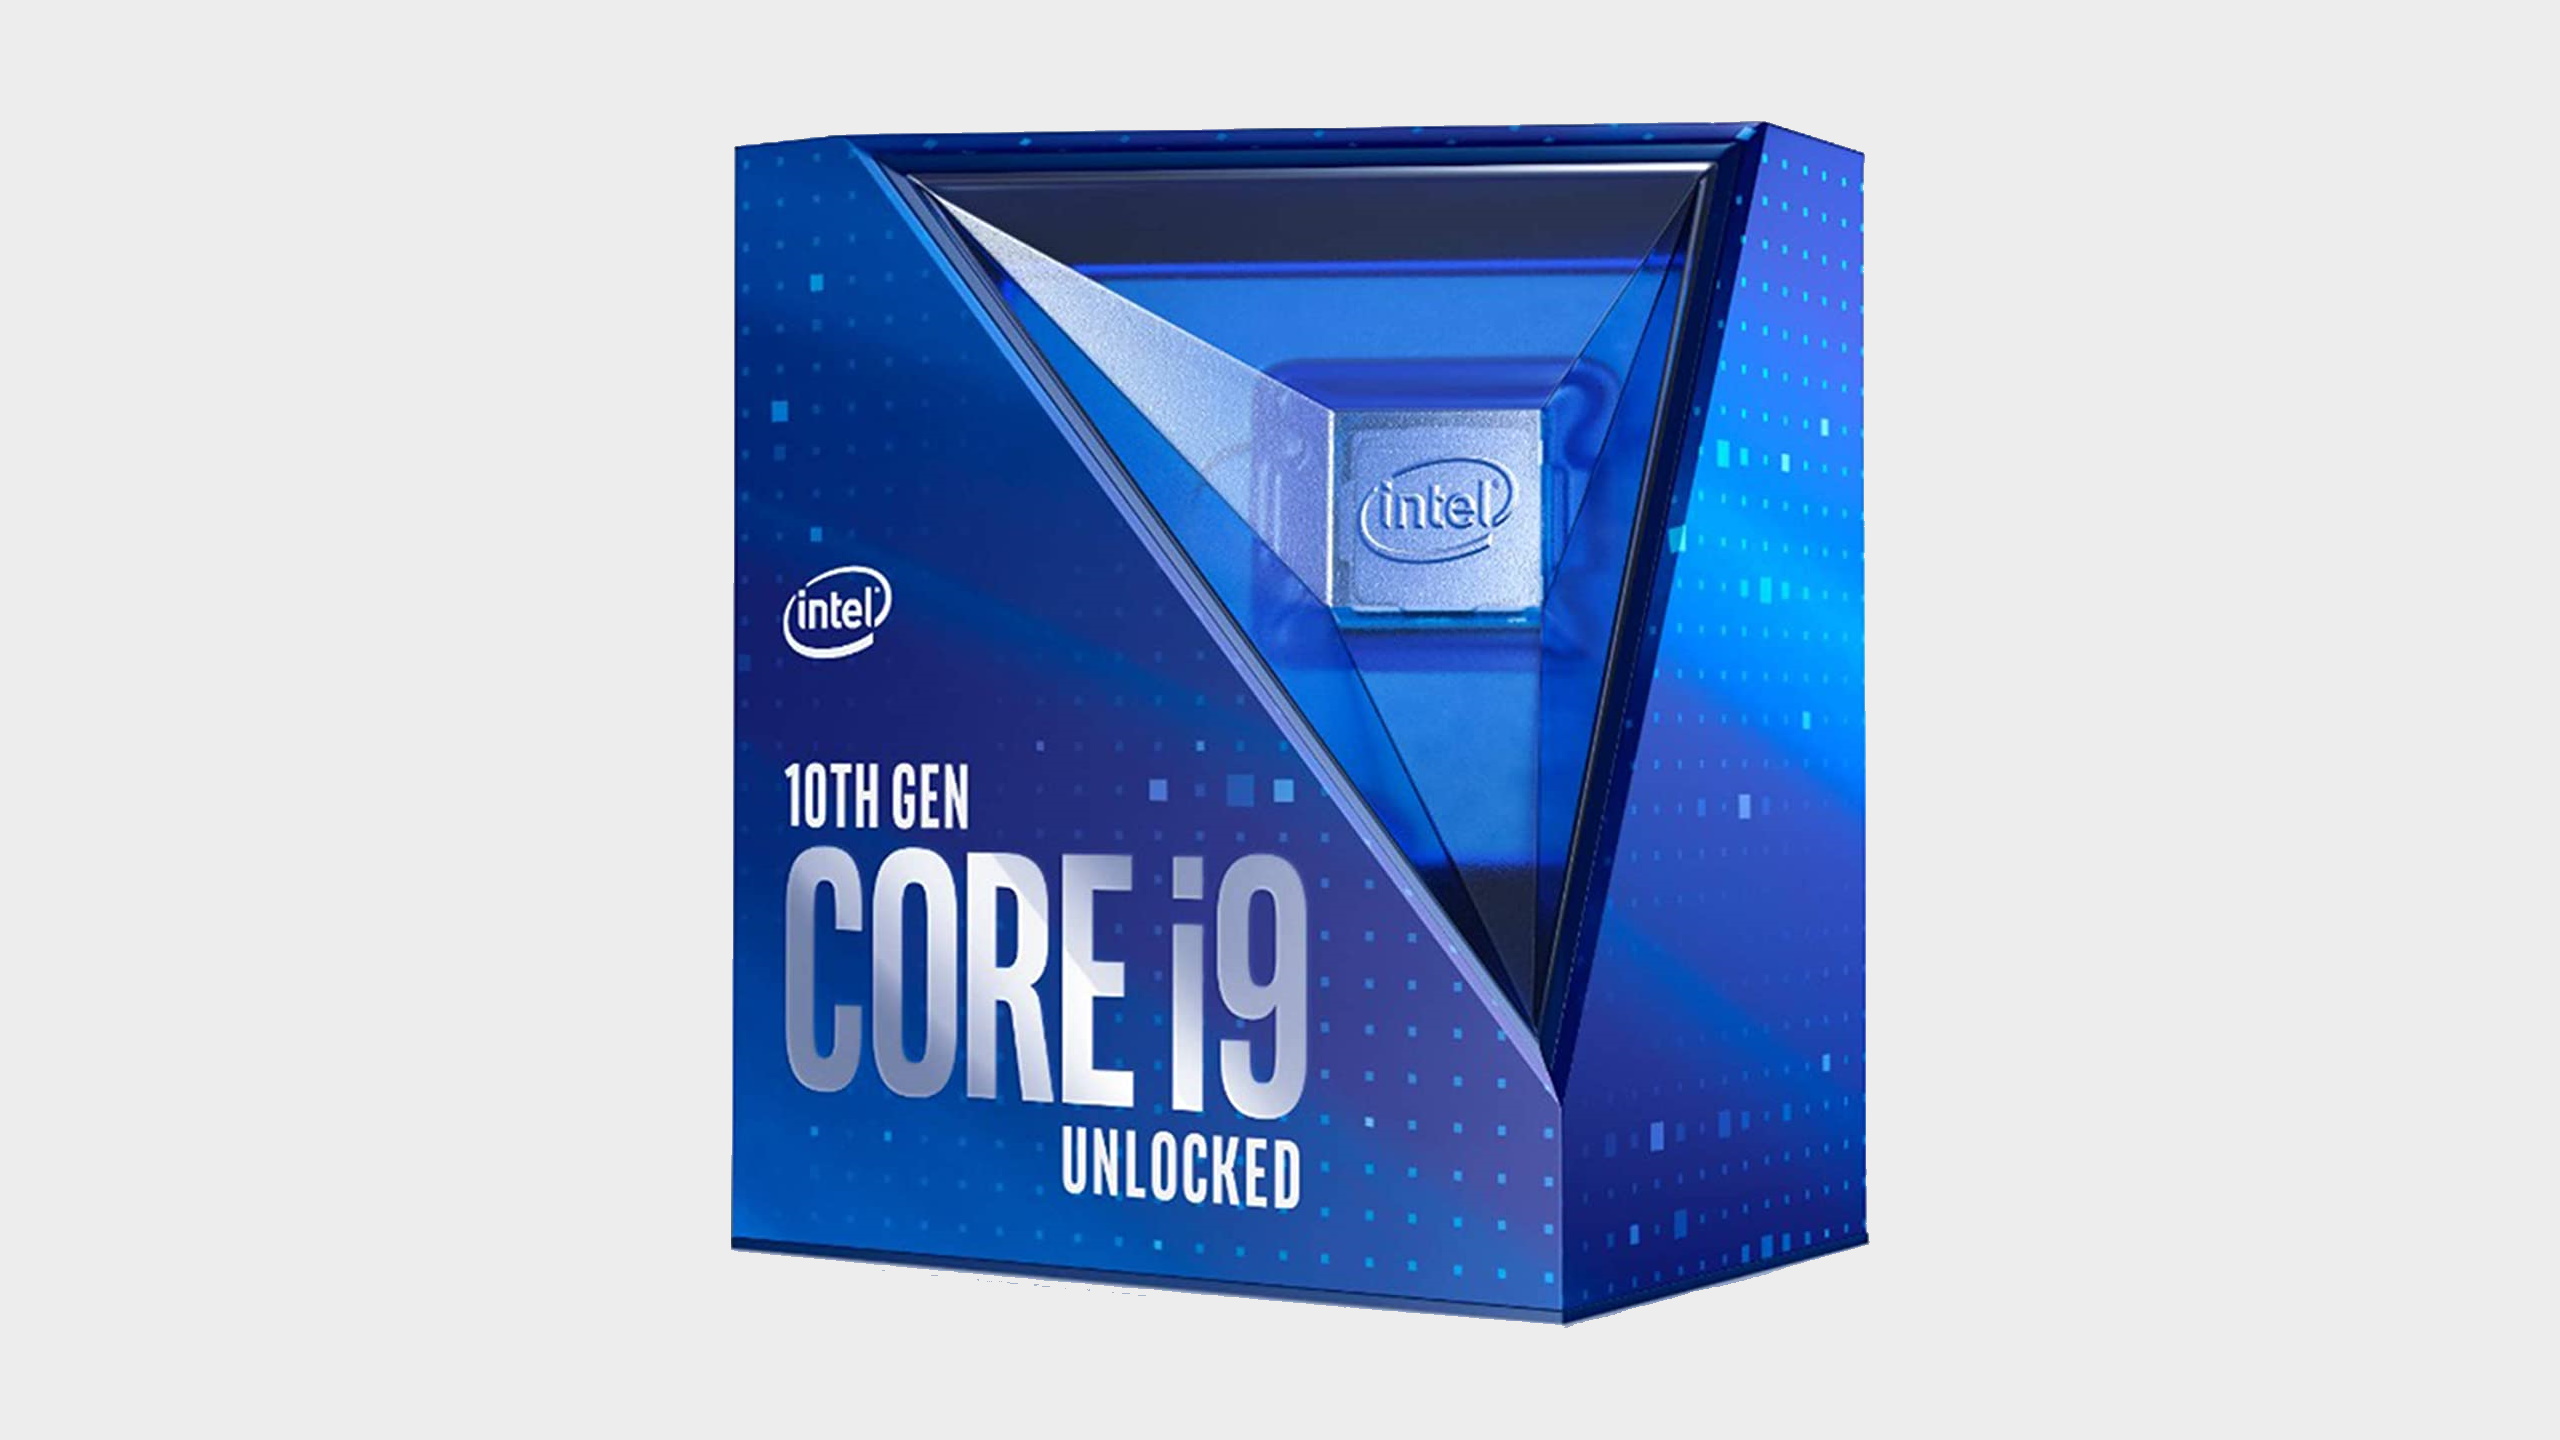 Intel Core i9 10900K box in front of a gray background.